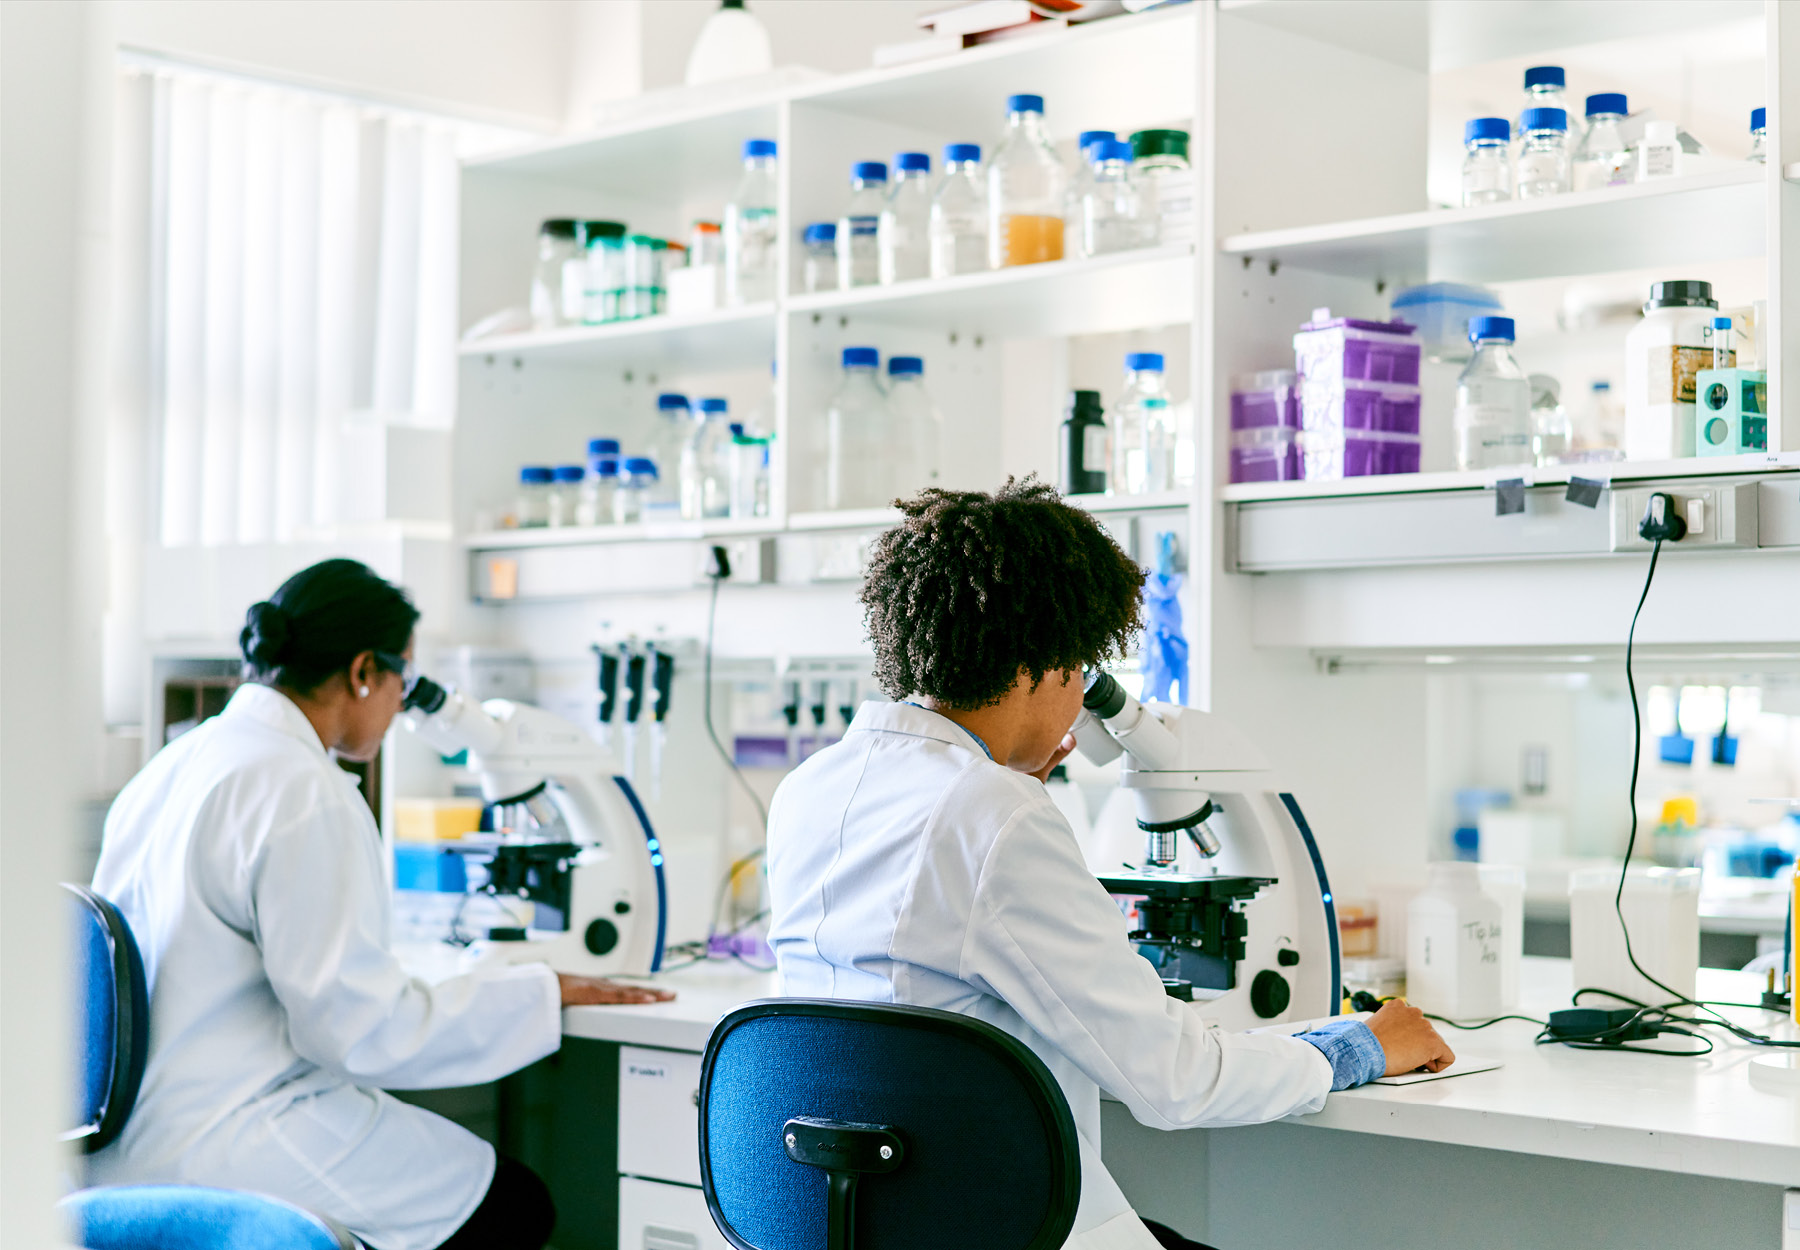 Two female scientists examining samples with microscopes while working together at a table in a laboratory. Stock photo.